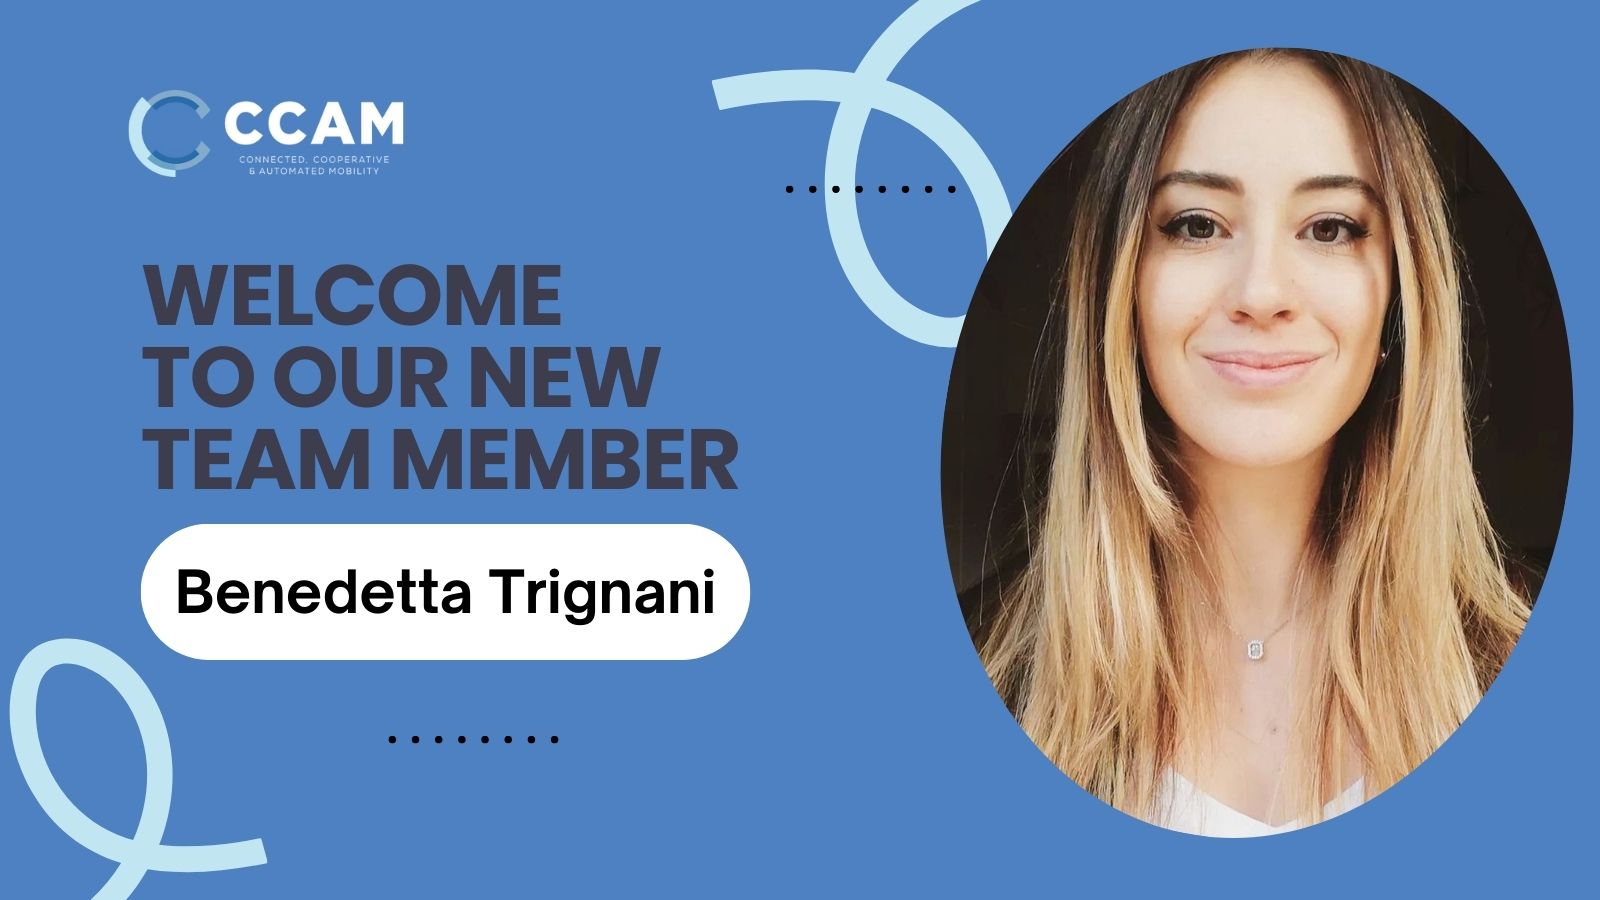 Welcome to Benedetta Trignani as the new Monitoring and Reporting Officer